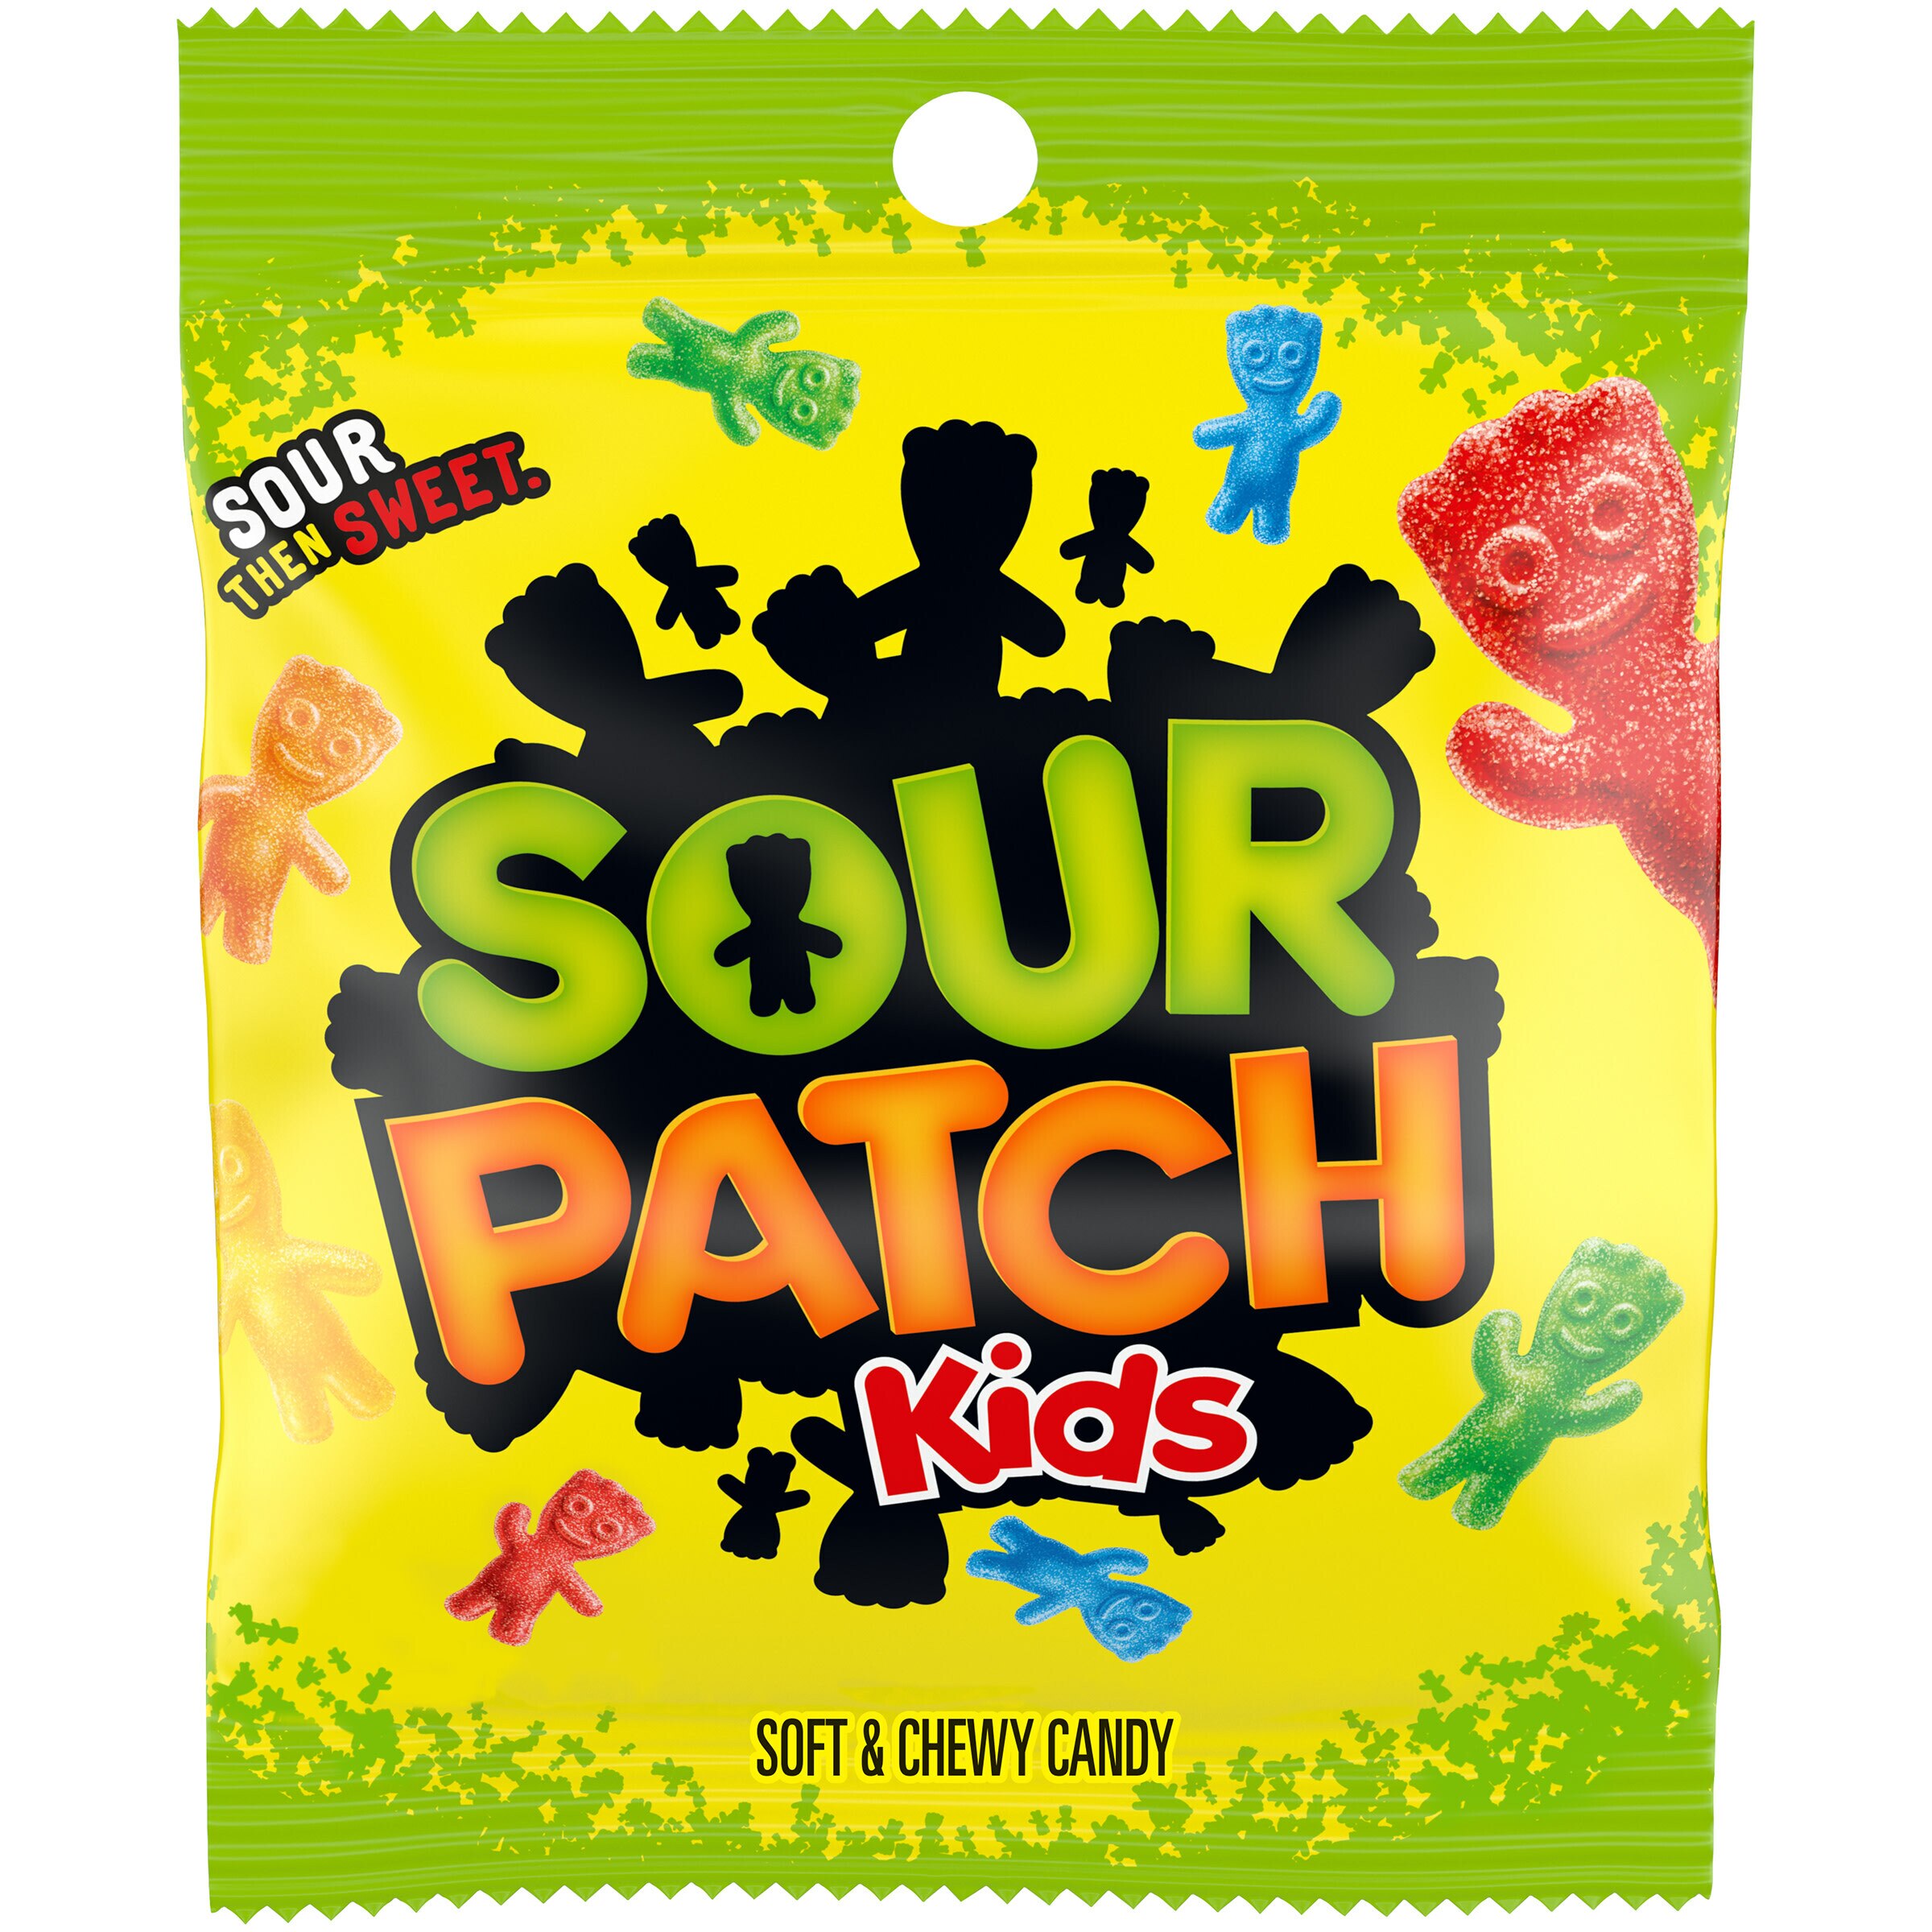 Sour Patch Kids Original Soft & Chewy Candy